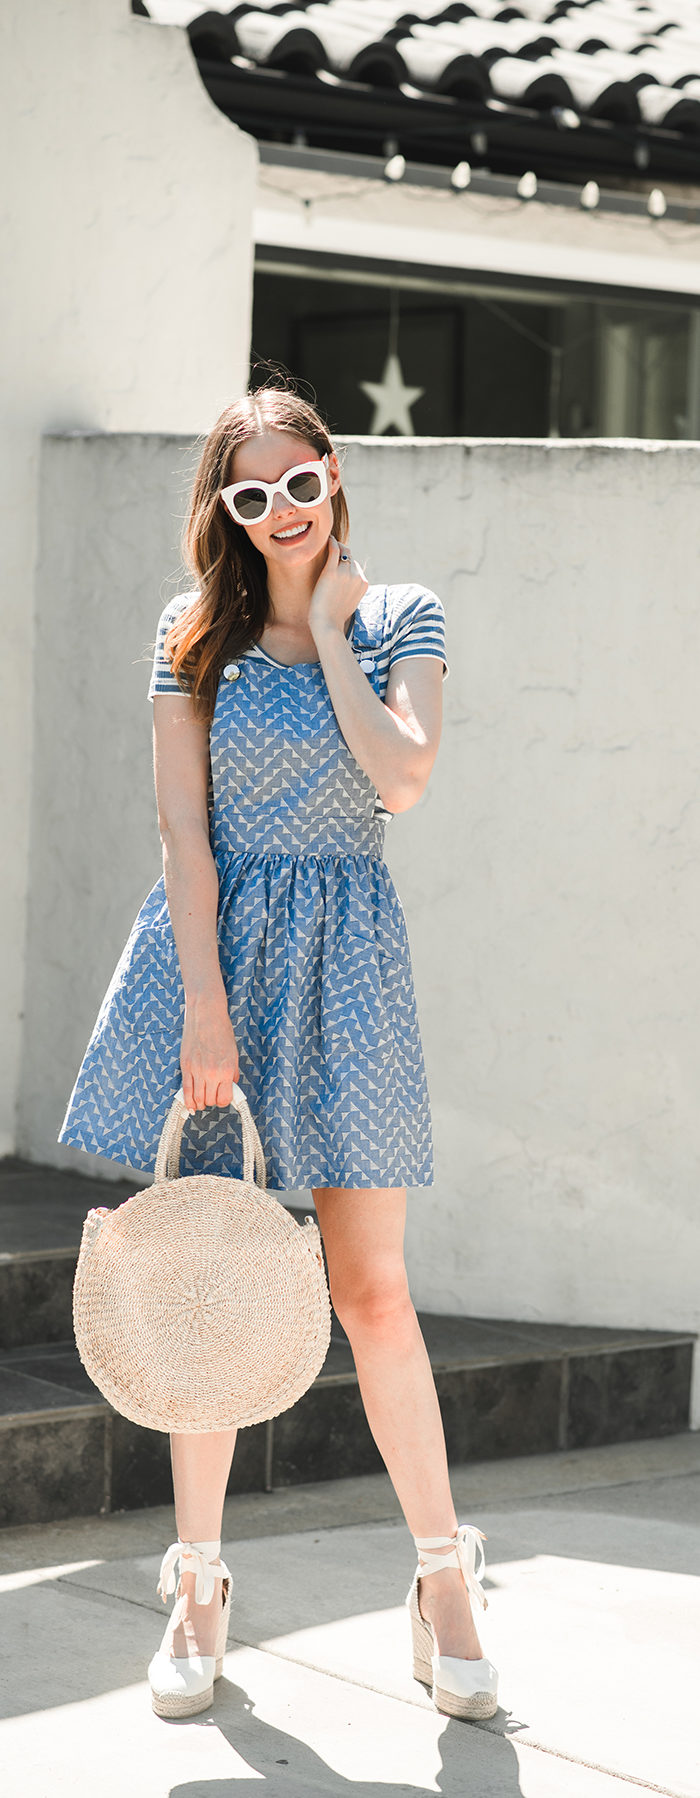 Alyssa Campanella of The A List blog wearing Related Scout dress and Clare V alice bag and Castaner Carina wedges